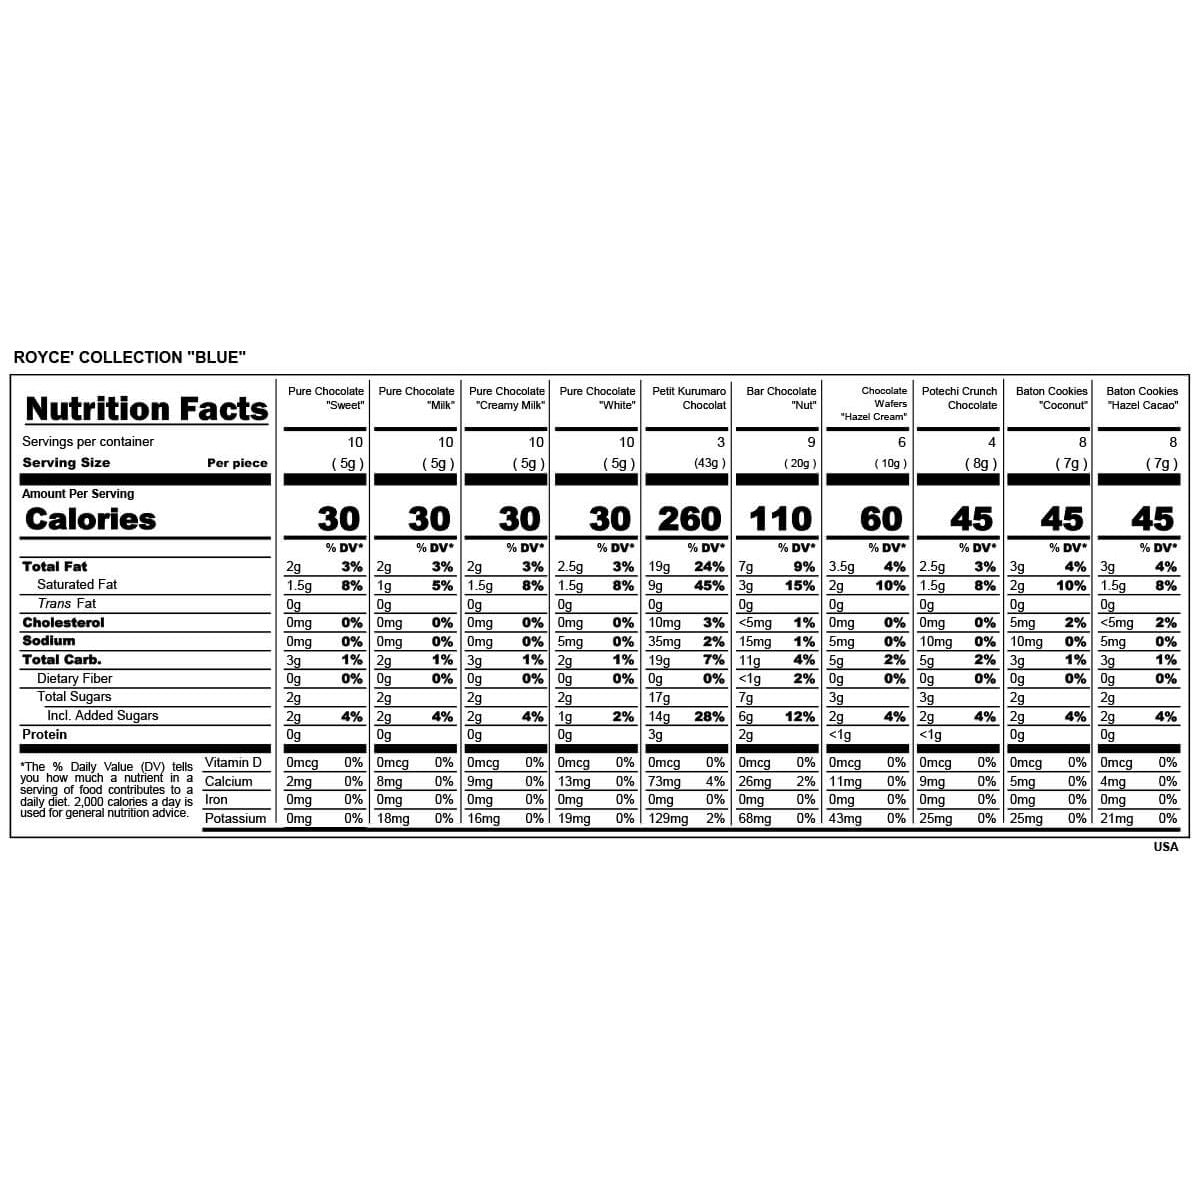 ROYCE' Chocolate - ROYCE' Collection "Blue" - Nutrition Facts